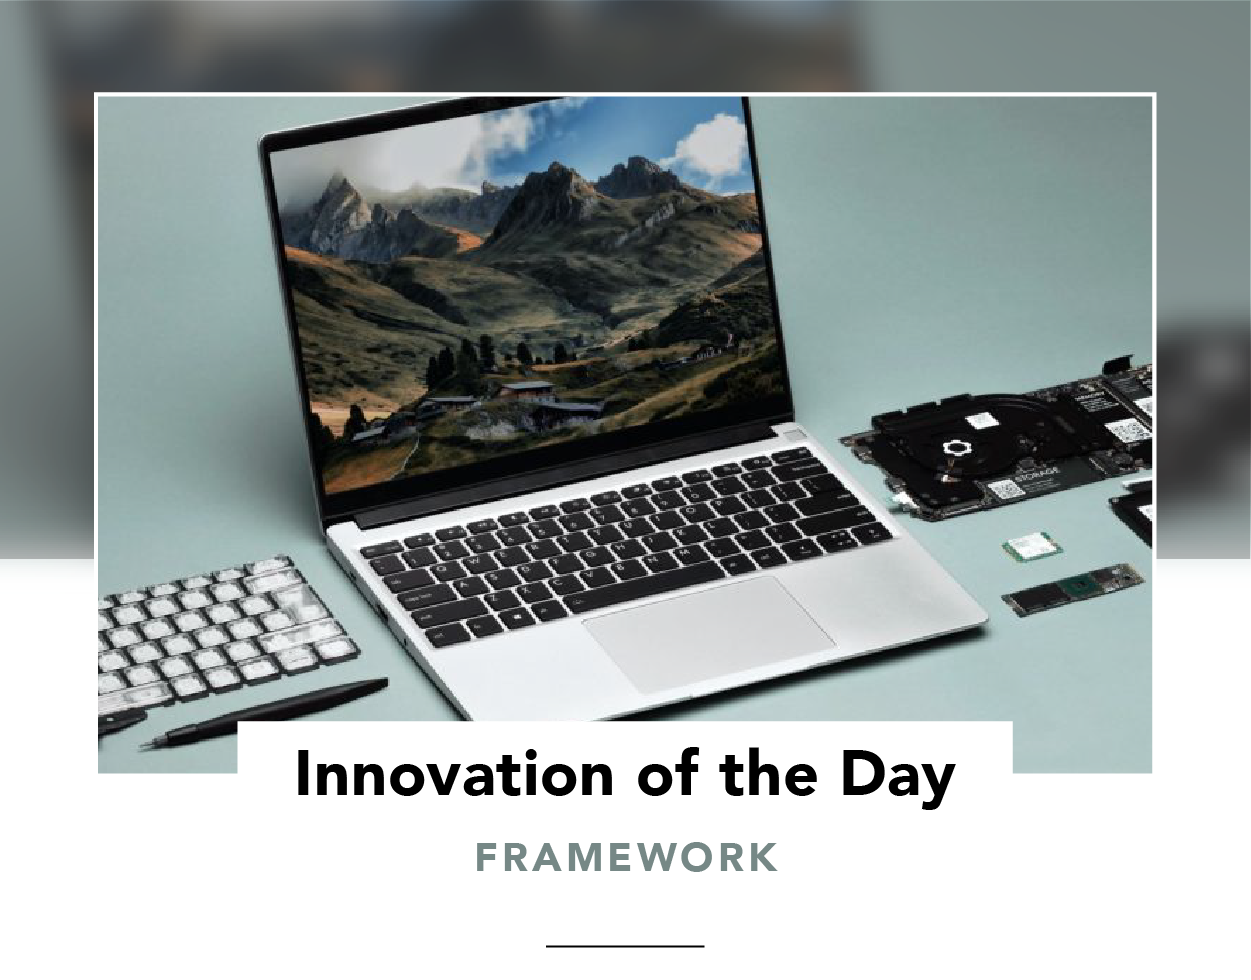 Framework laptop surrounded by a screwdriver and replaceable parts